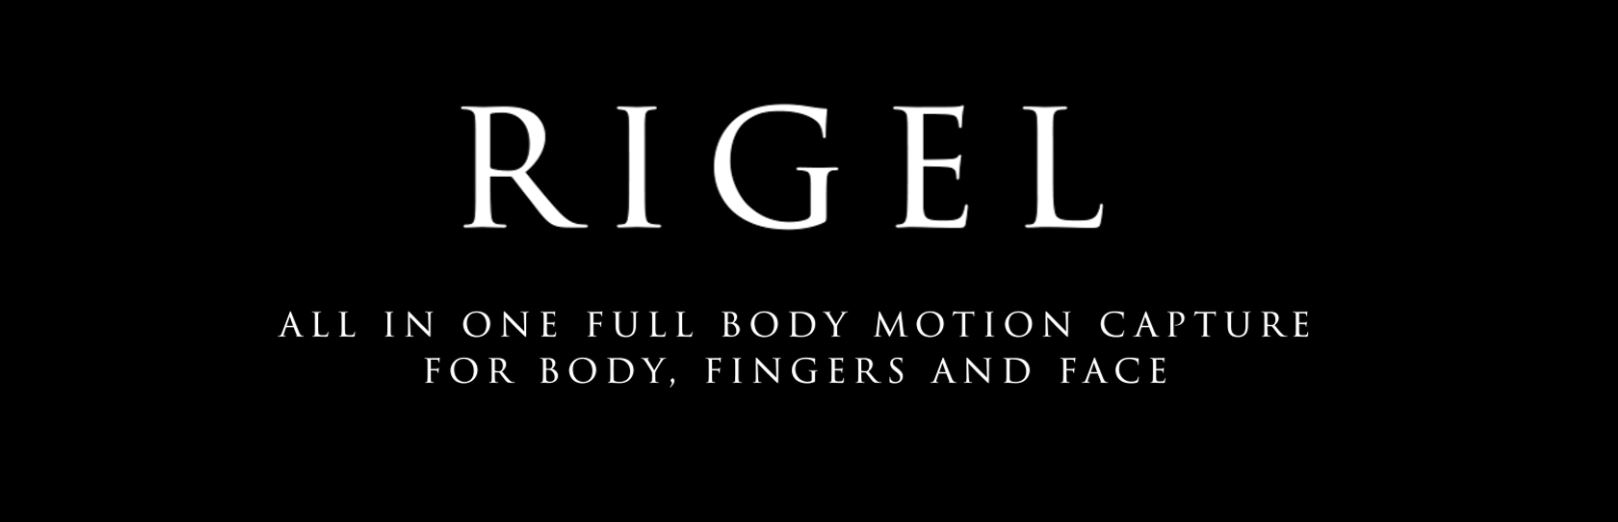 Rigel - All in One Full Body Motion Capture for Body, Fingers and Face - Demo Available